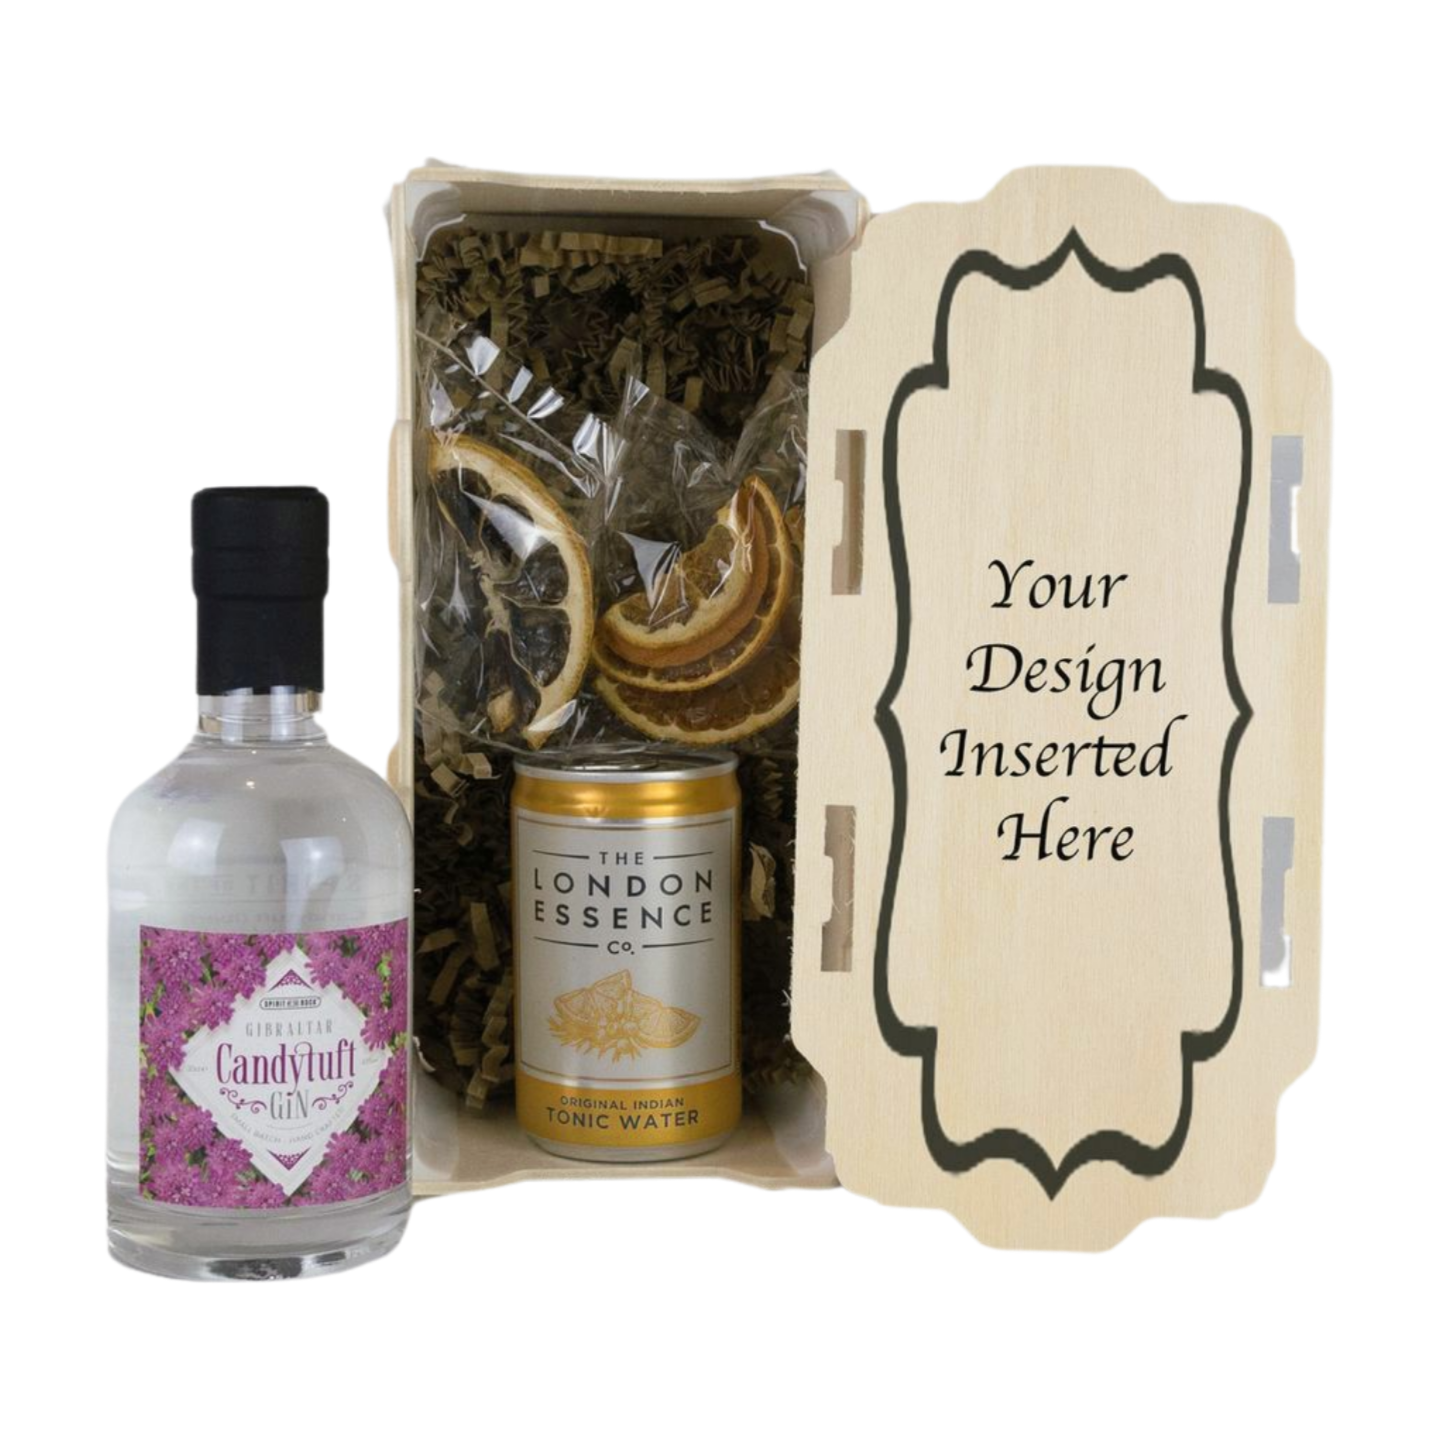 candytuft in stylish wooden gift box